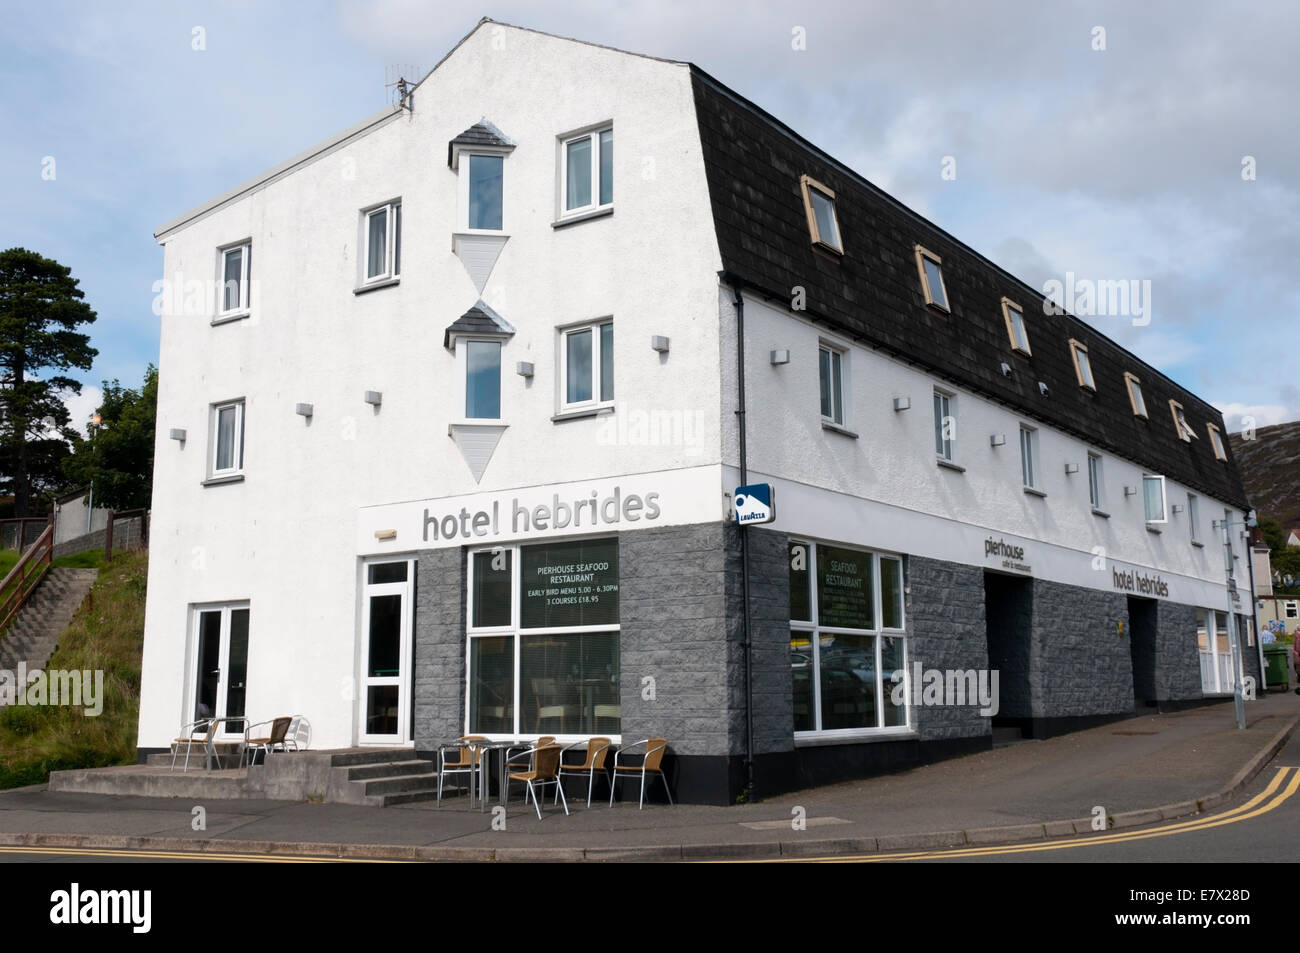 The Hotel Hebrides and Pierhead Seafood Restaurant in Tarbert on the Isle of Harris. Stock Photo